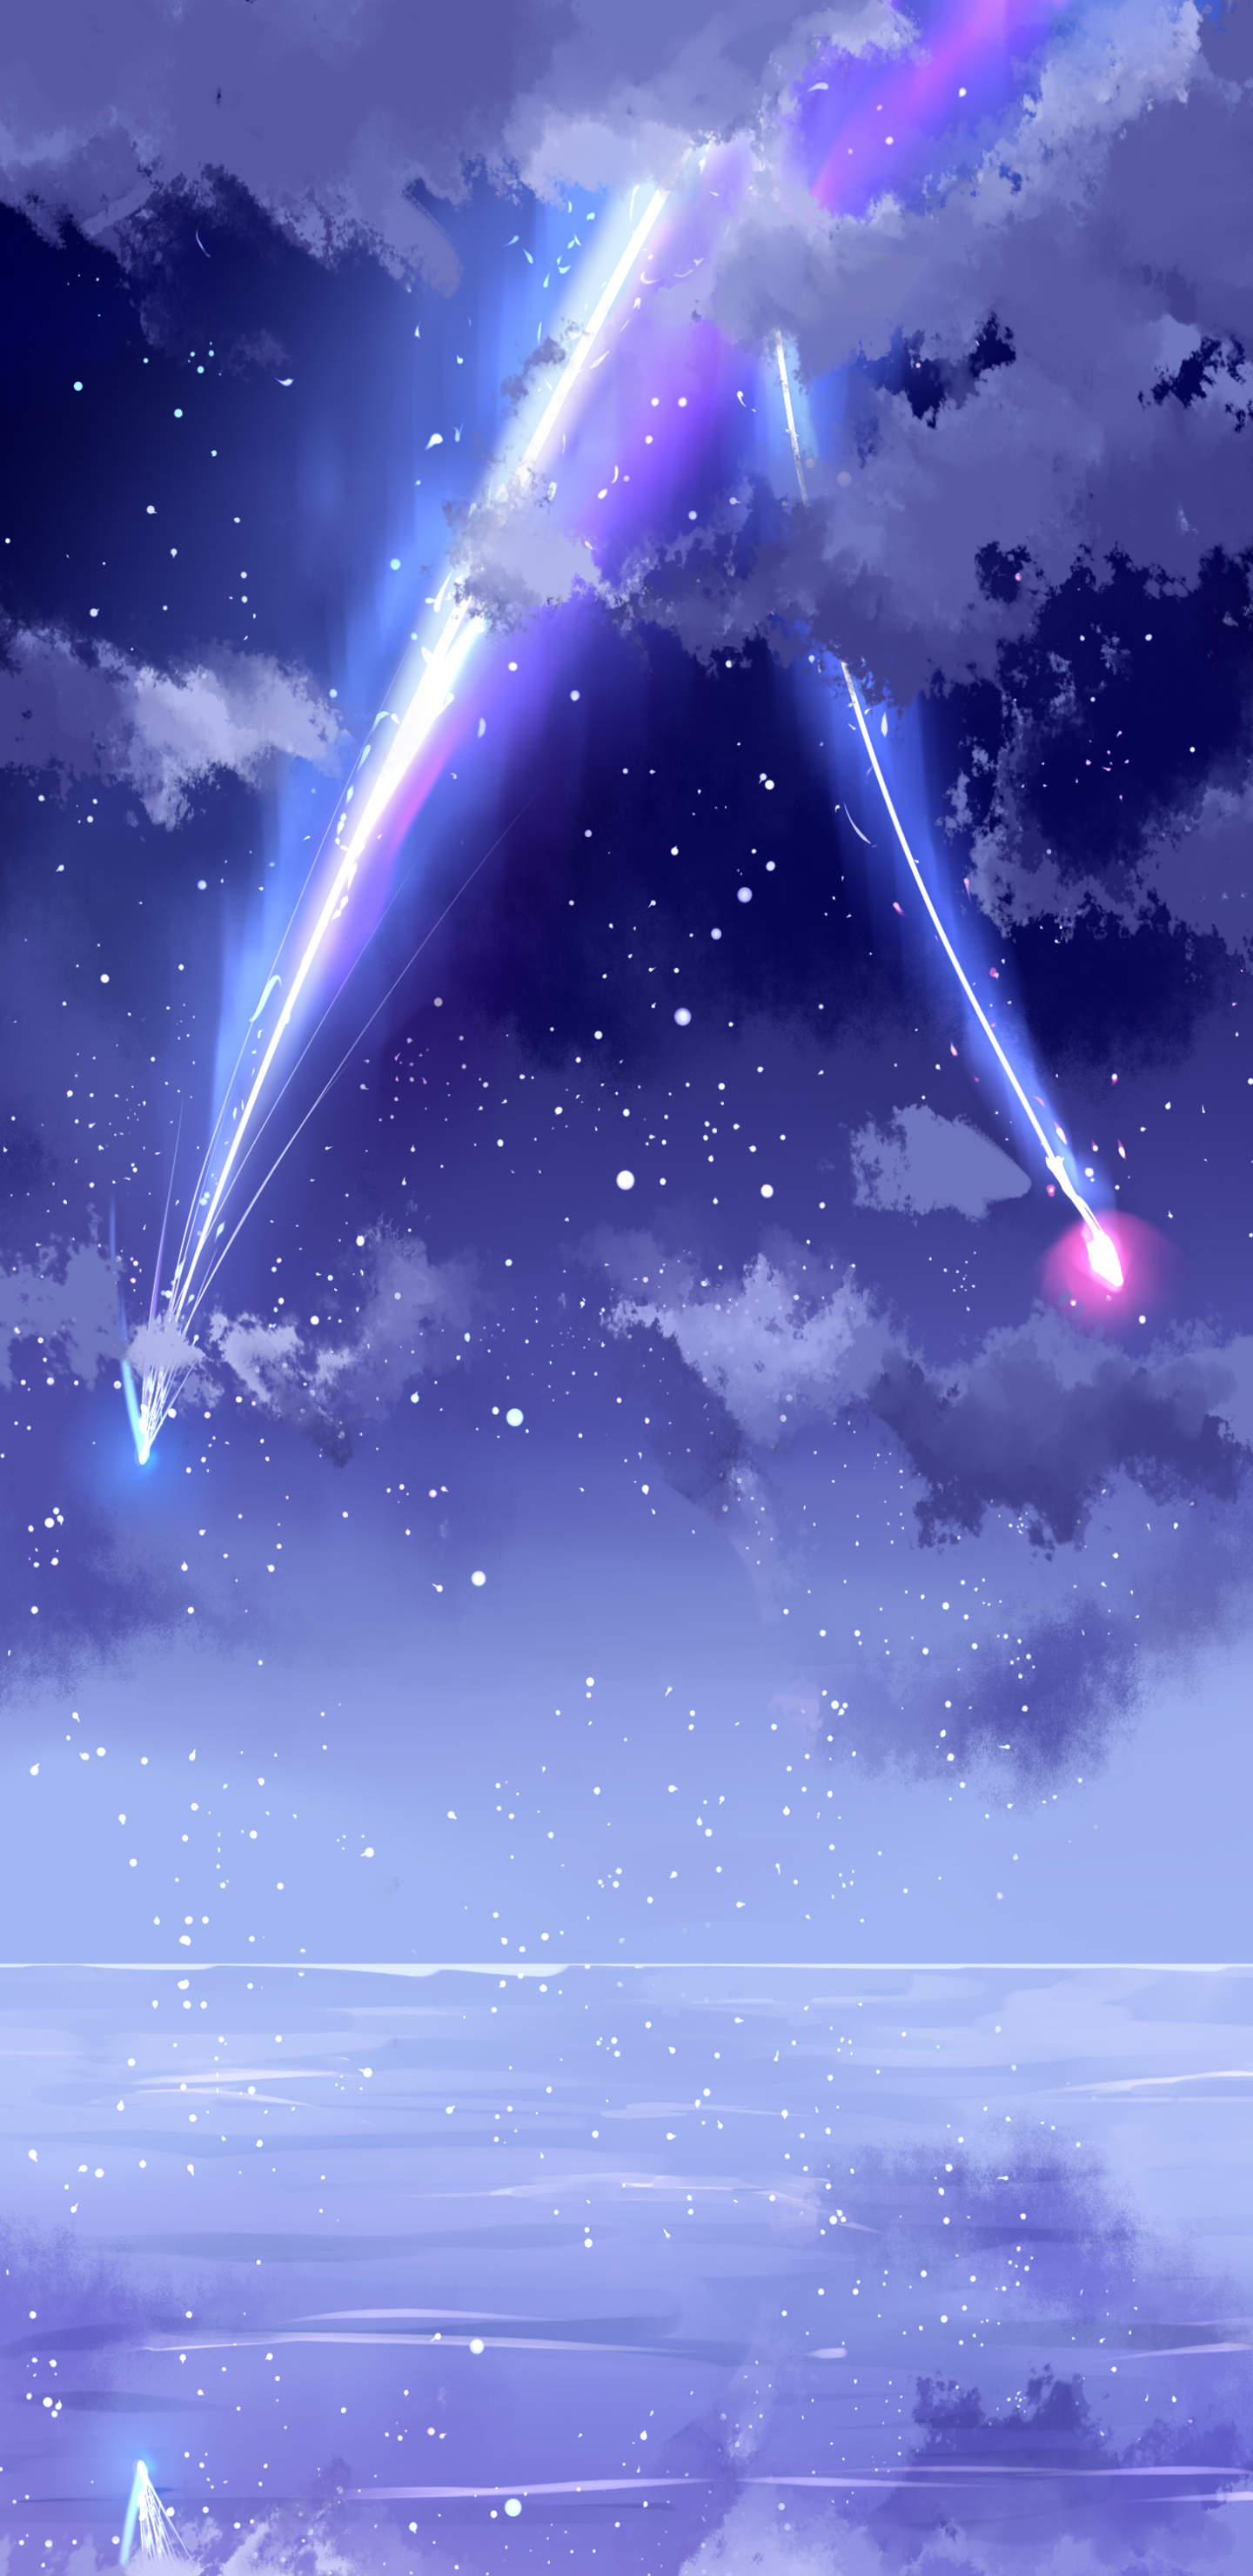 Your Name Iphone X - 1440x2960 Wallpaper 